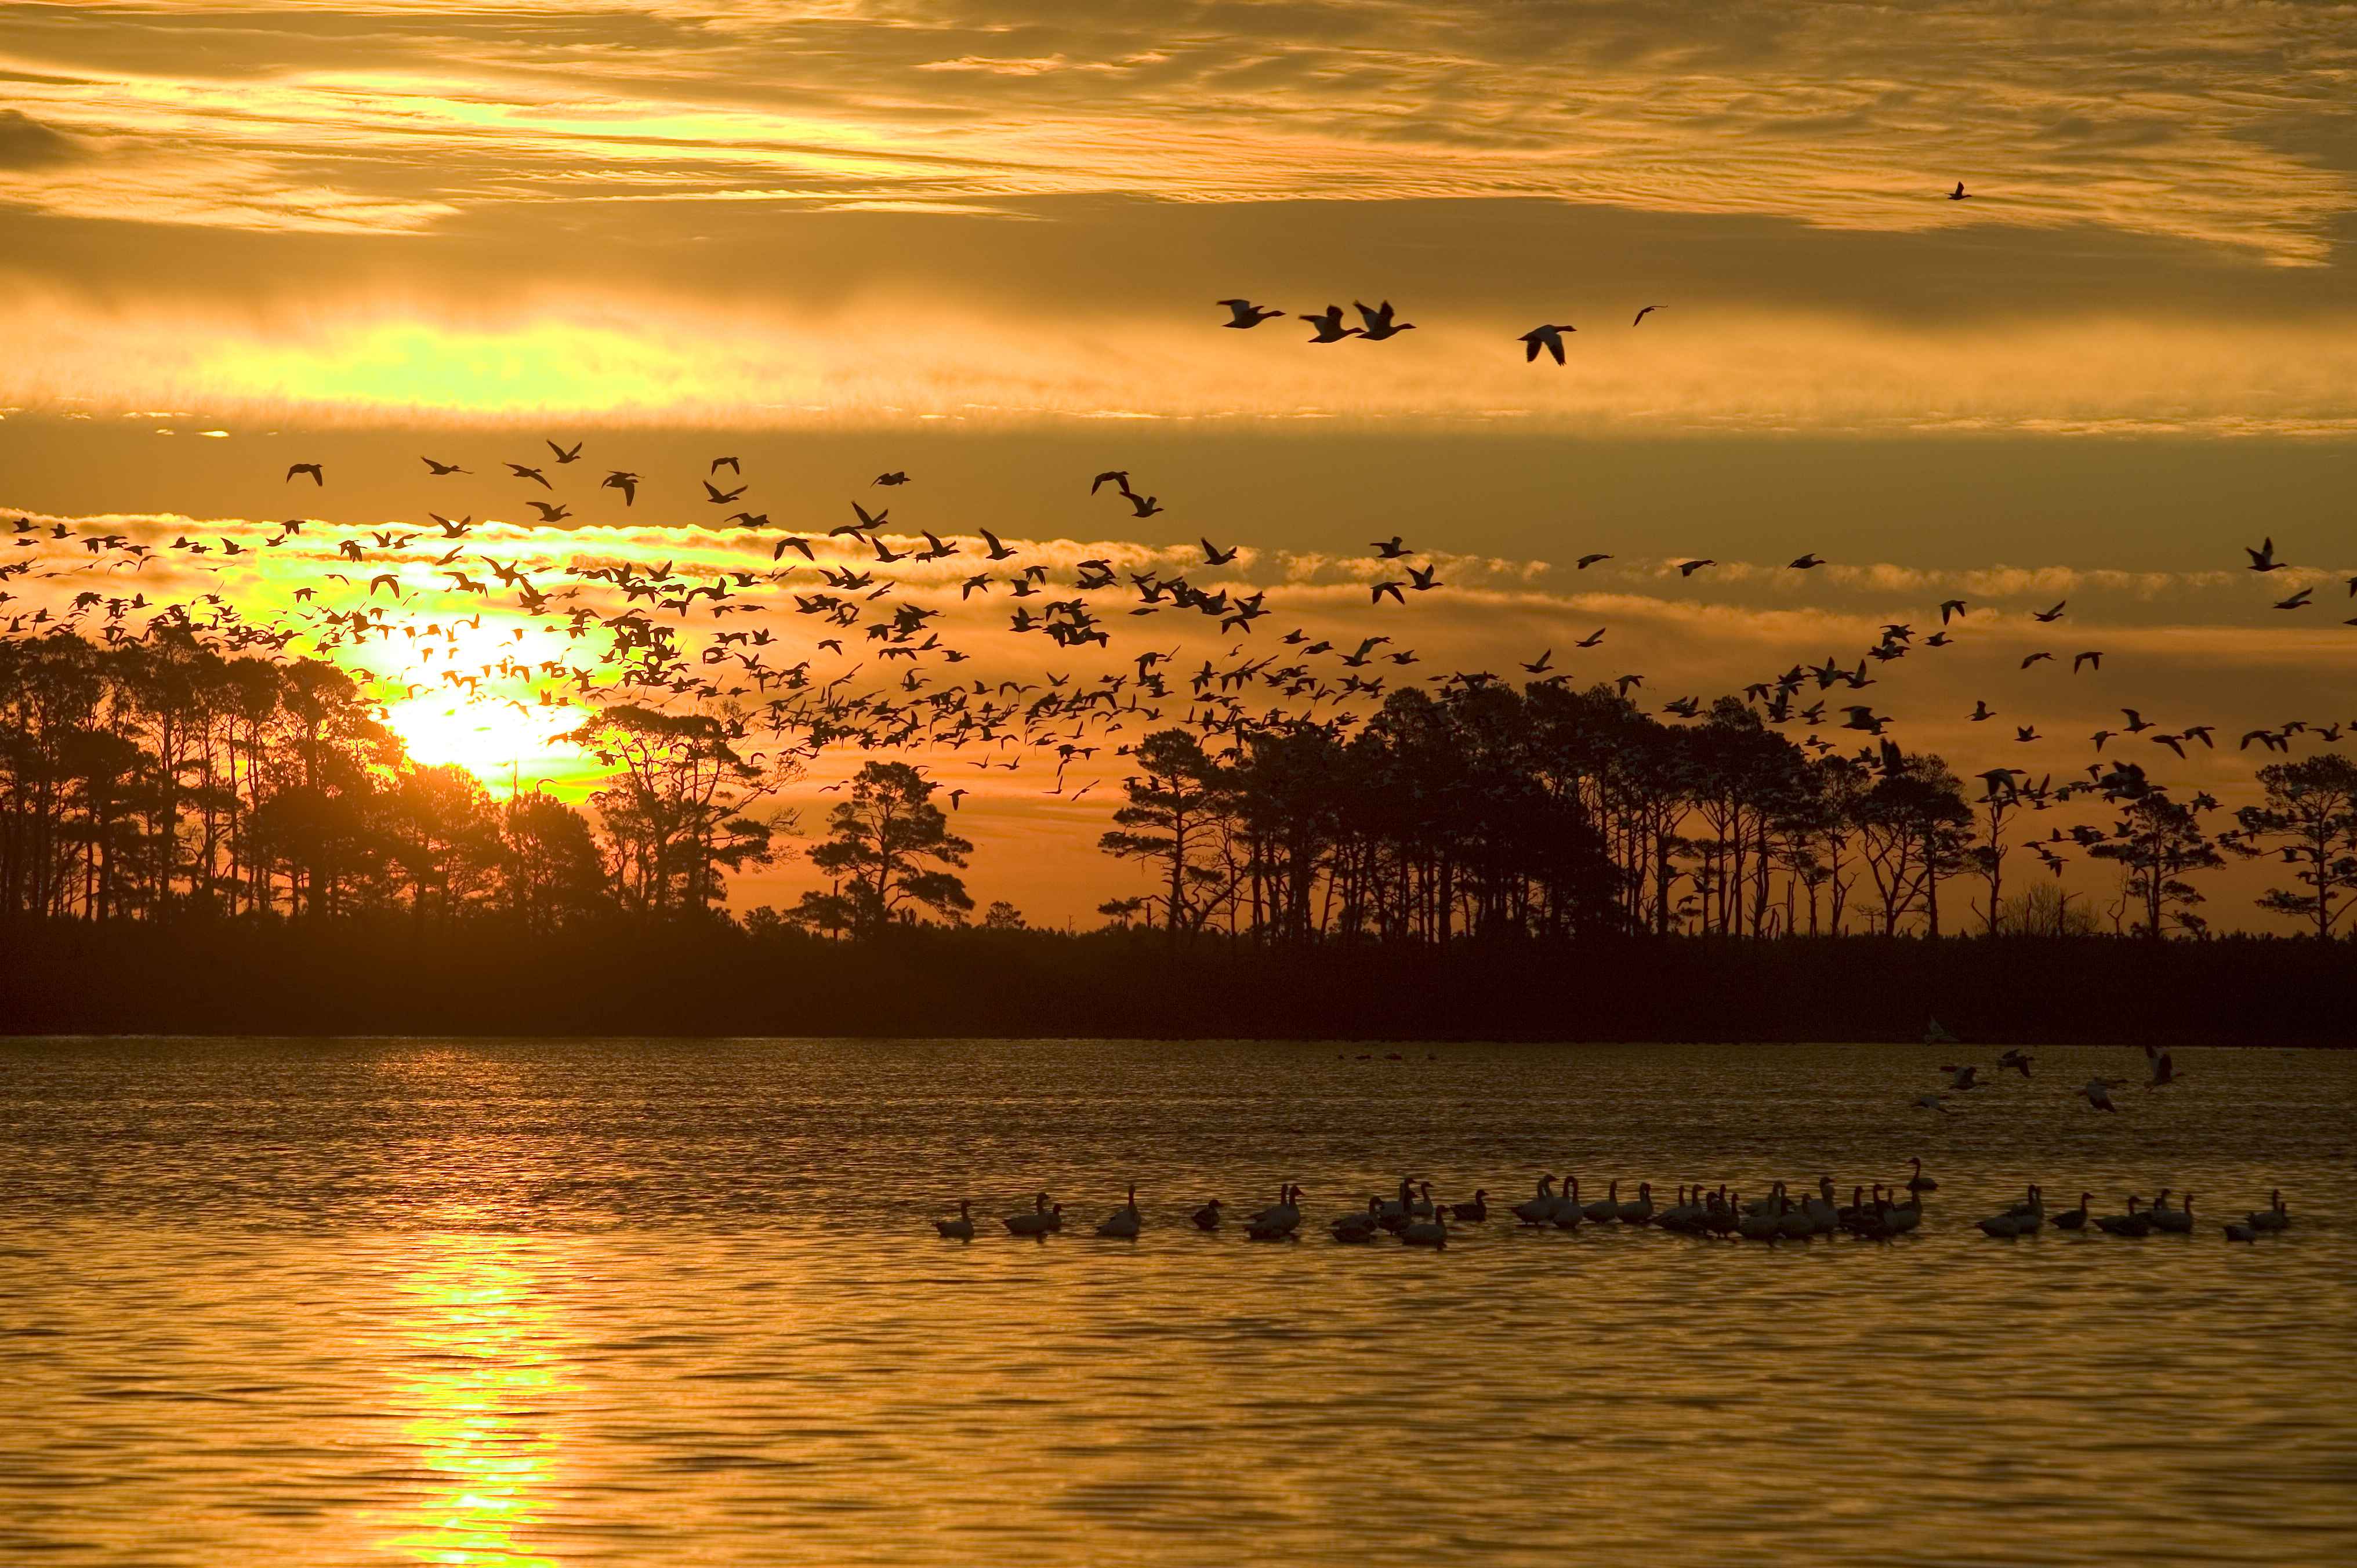 Waterfowl grace the skies at sunset